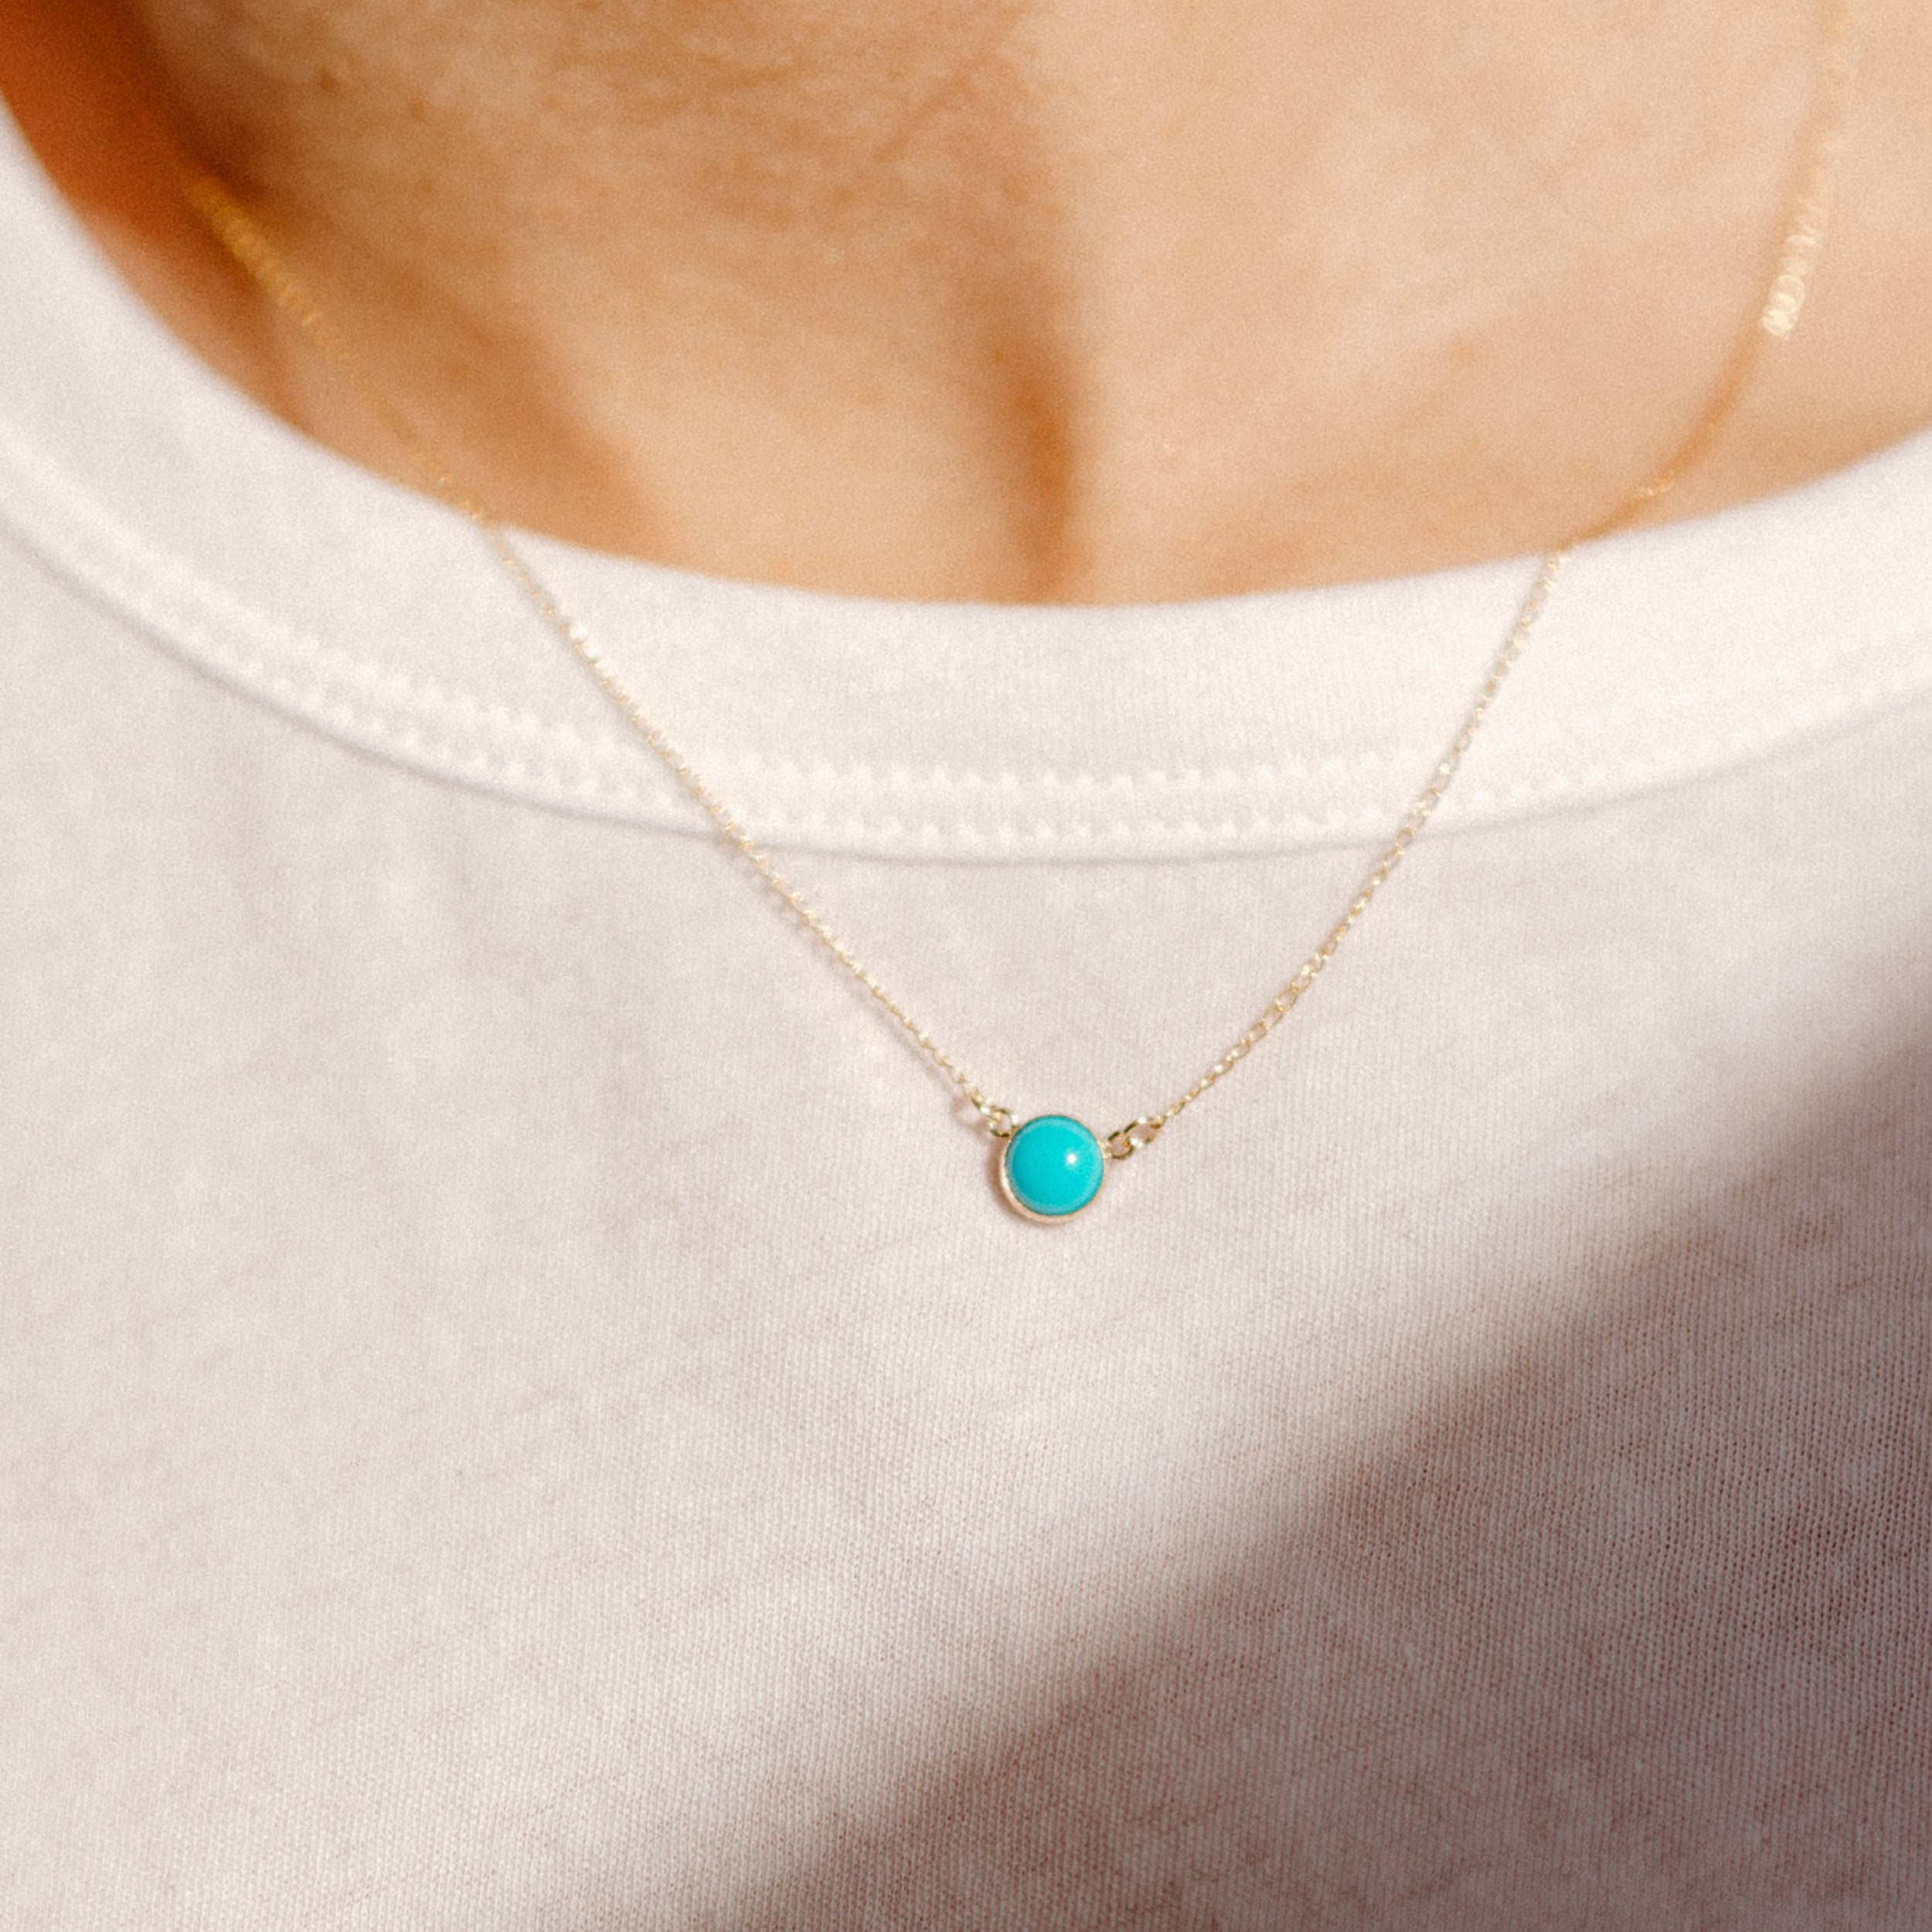 Ethically Sourced Turquoise Gemstone Necklace Sterling Silver - Favor Jewelry